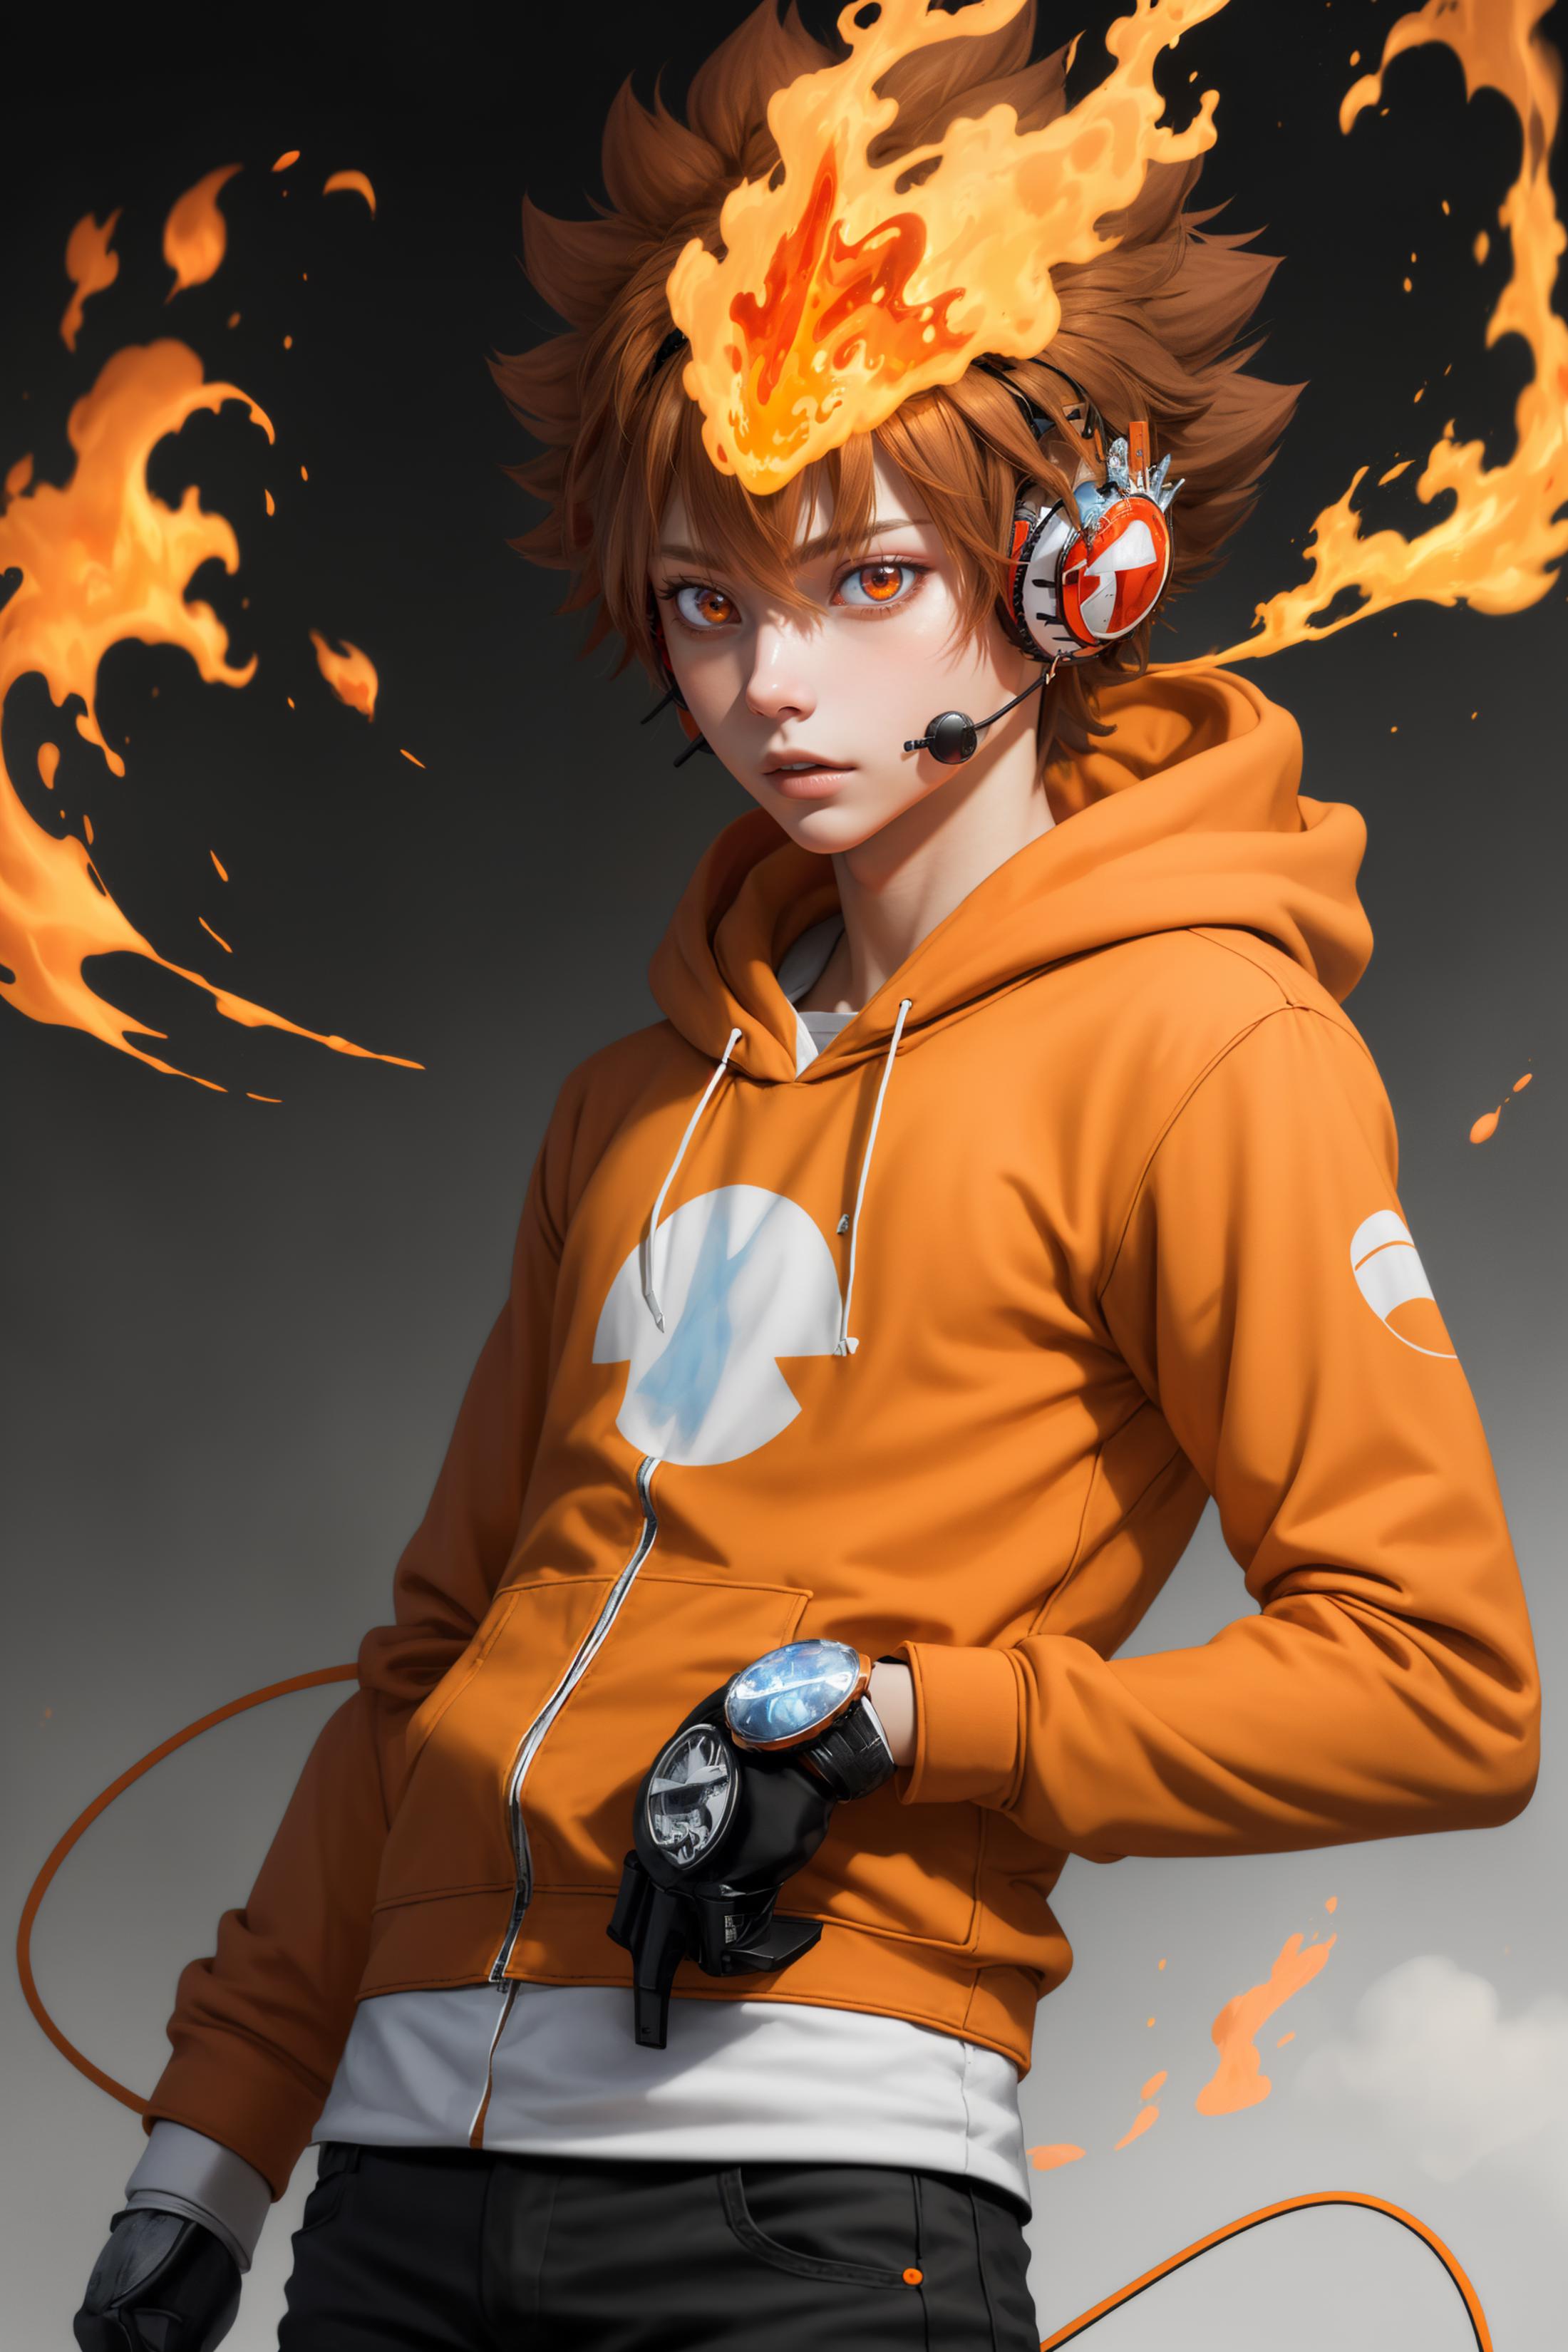 A young man wearing a orange hoodie and headphones with a clock face on his wrist.